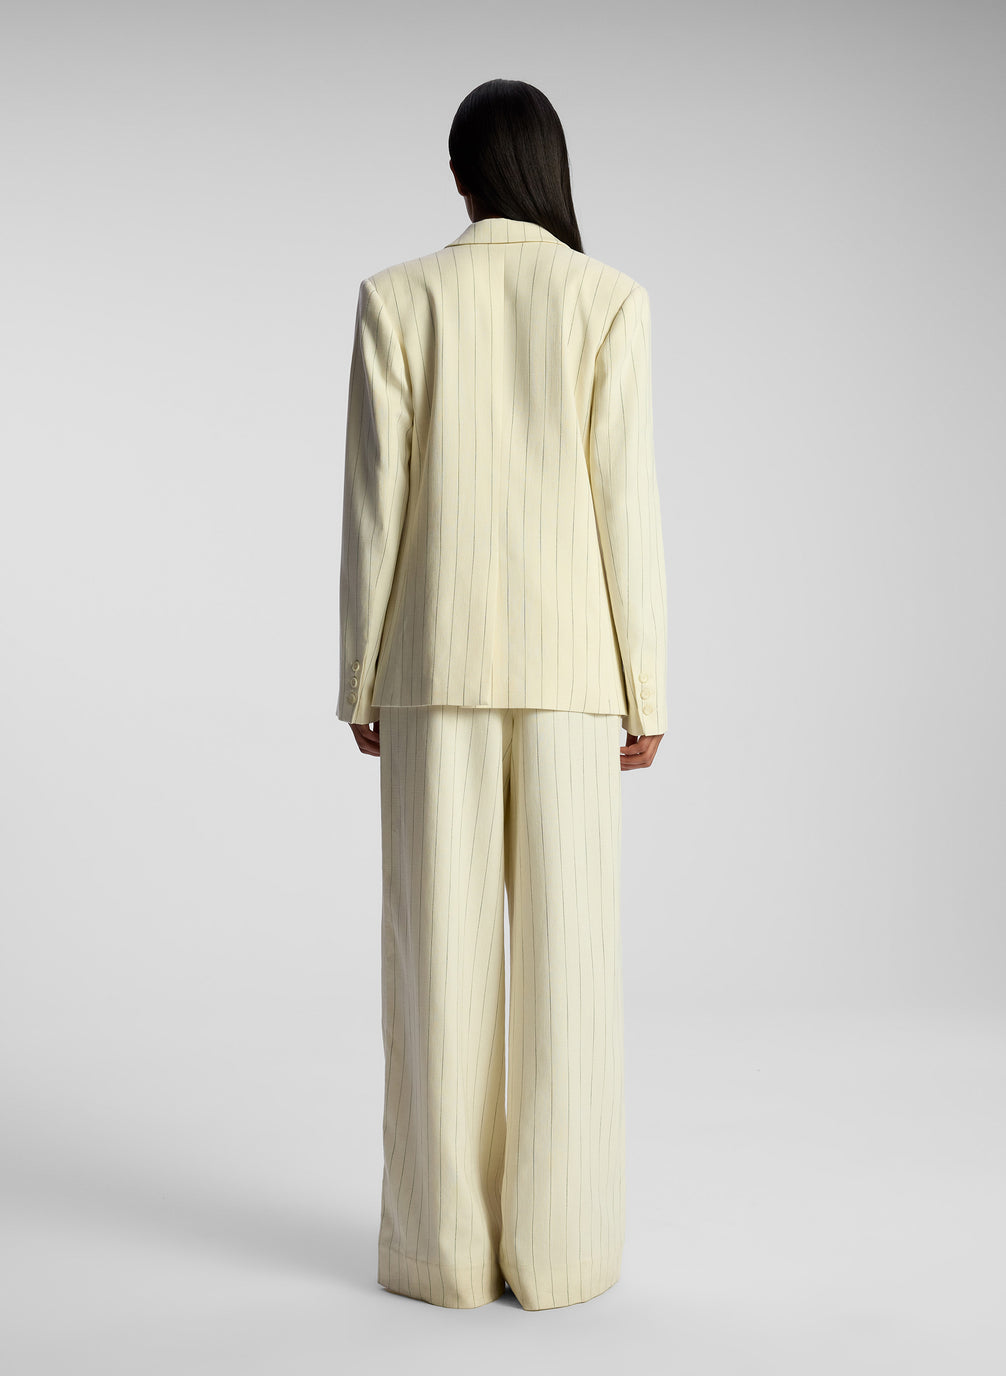 back view of woman wearing cream pinstripe suit